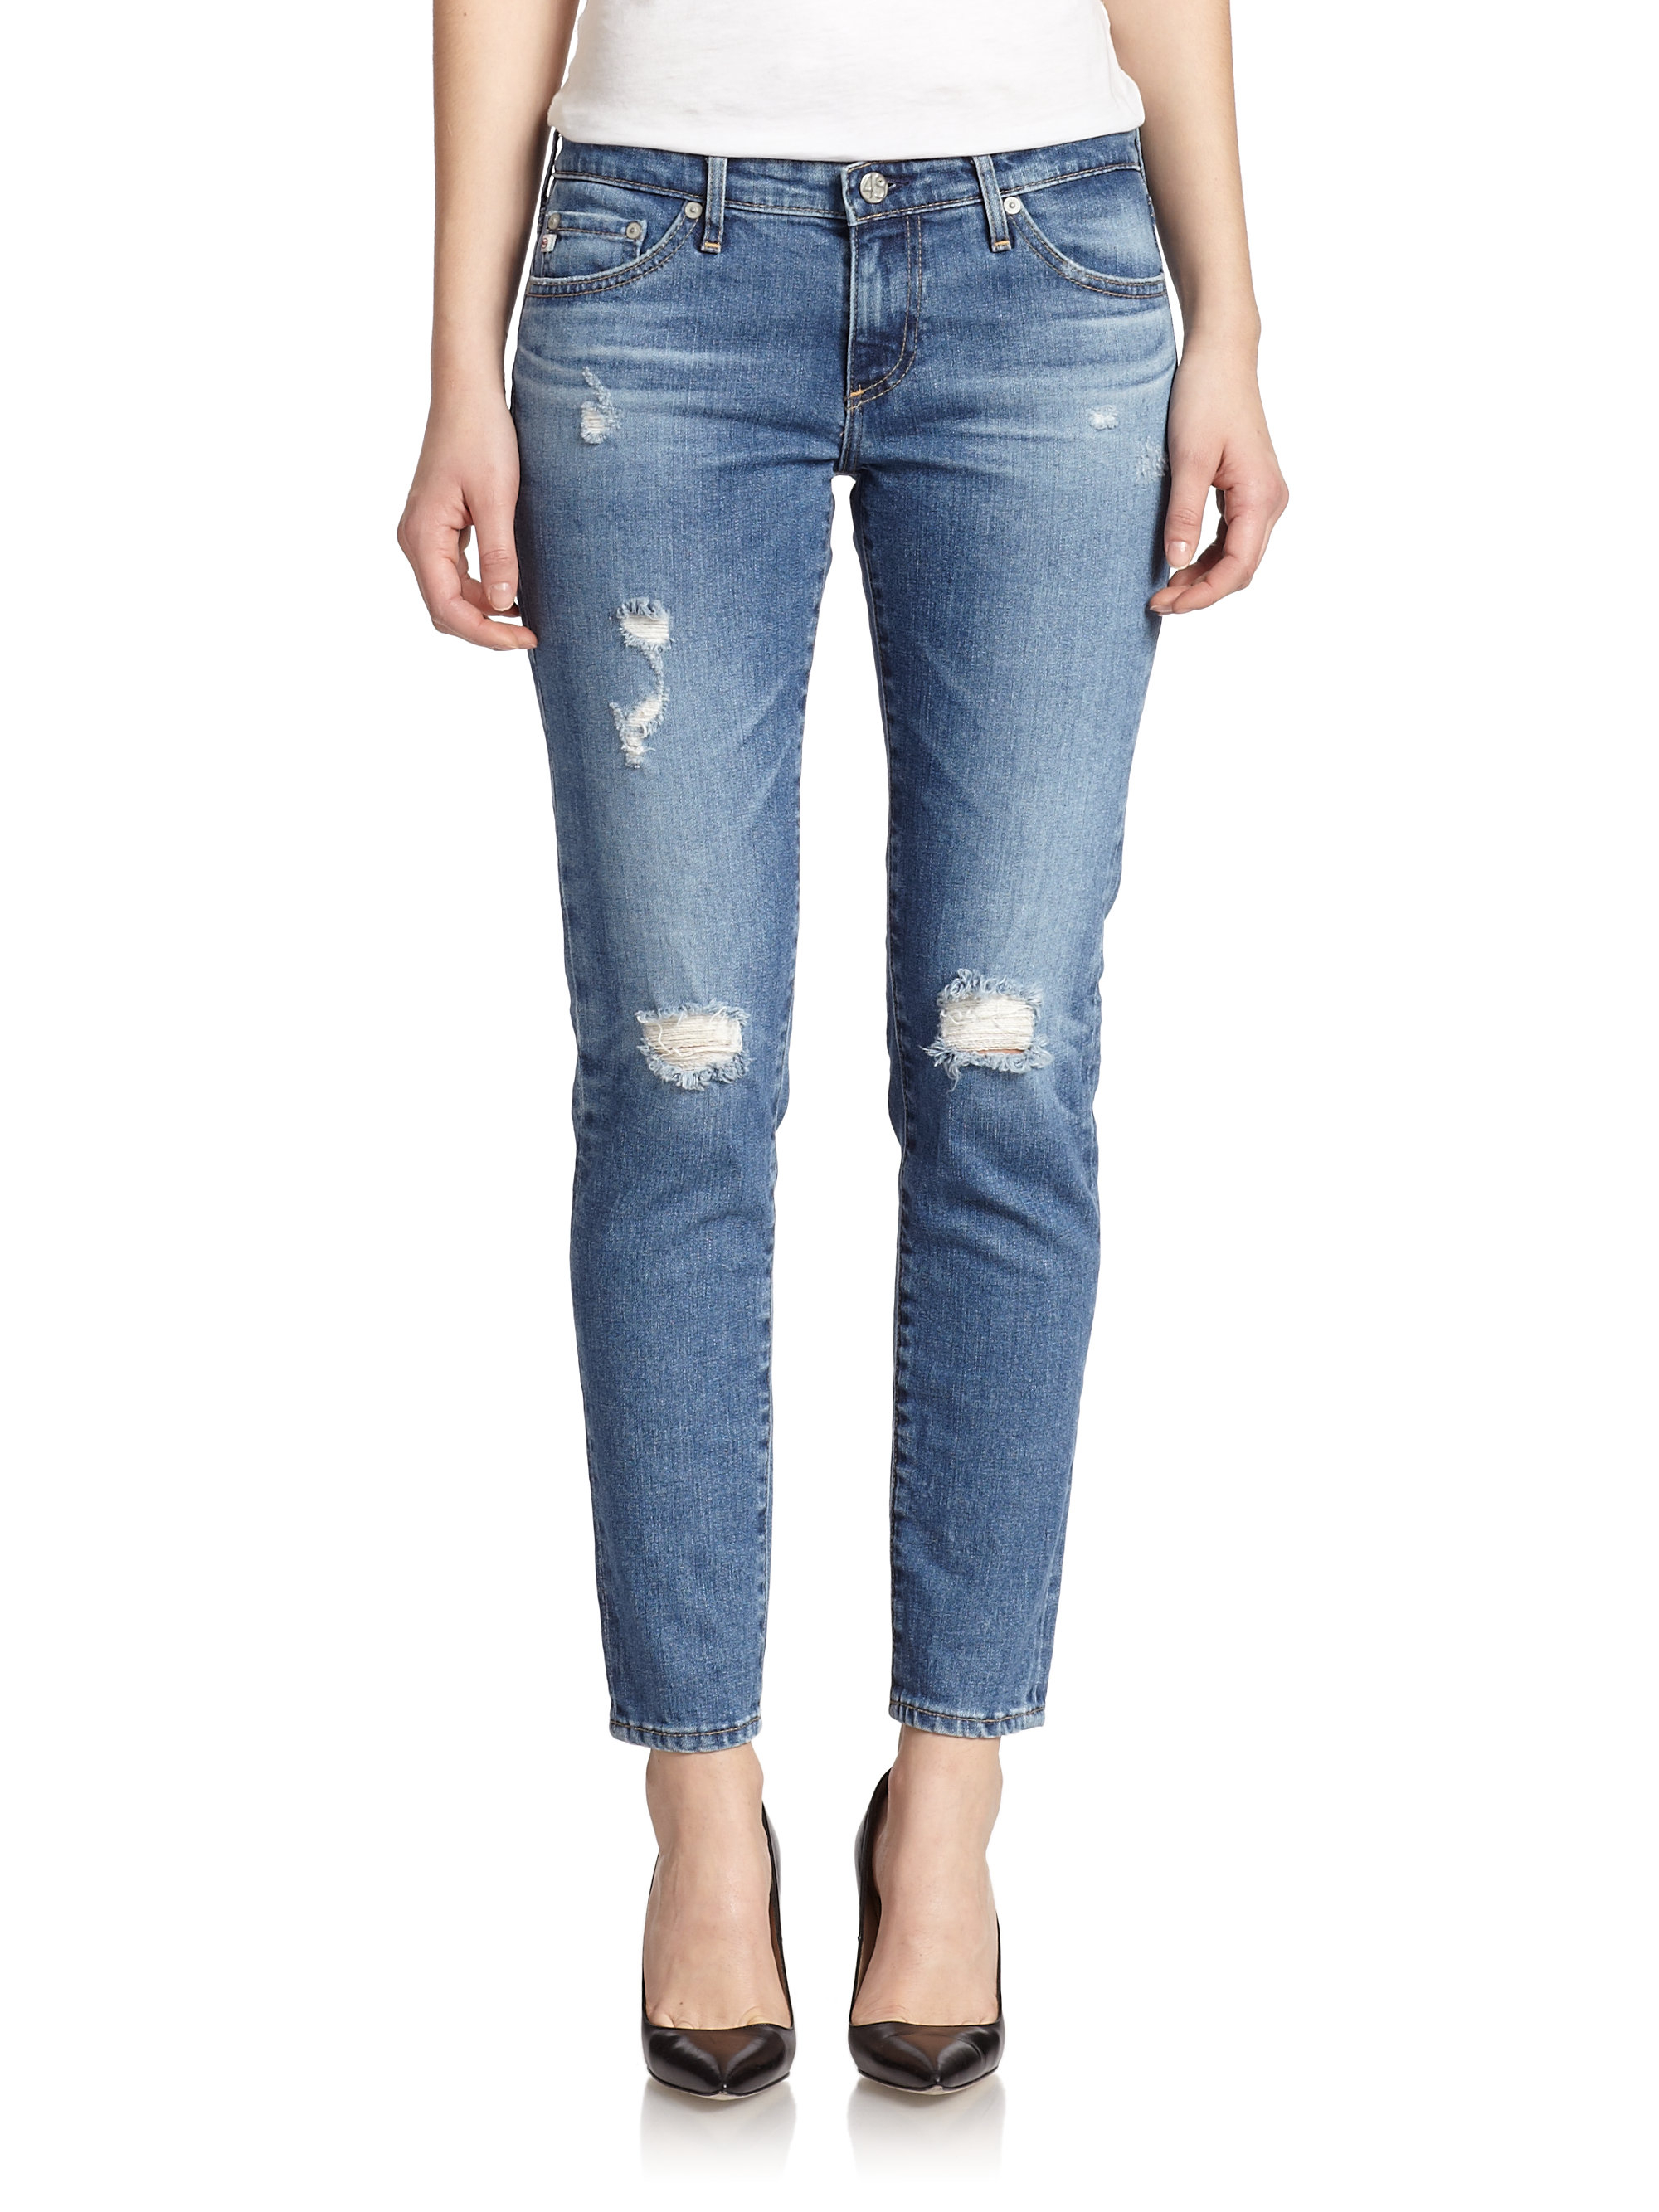 Ag jeans Stilt Distressed Cigarette Jeans in Blue (17 YEARS RIOT) | Lyst